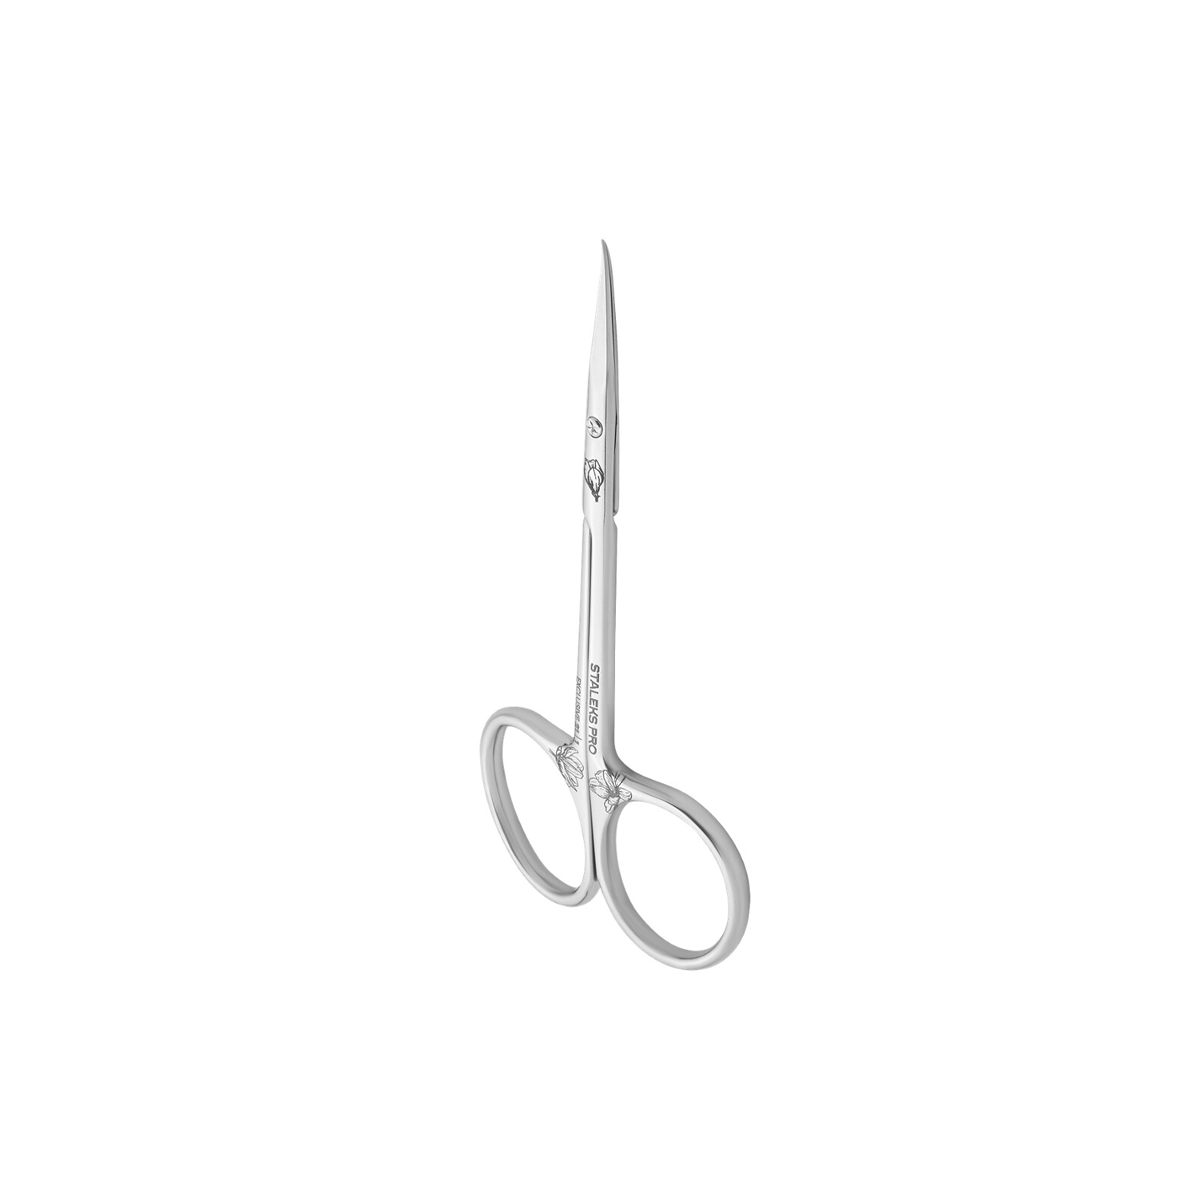    Staleks_Professional_cuticle_scissors_Exc._21_TYPE_1_Magnol._SX-_21_1M product view angle